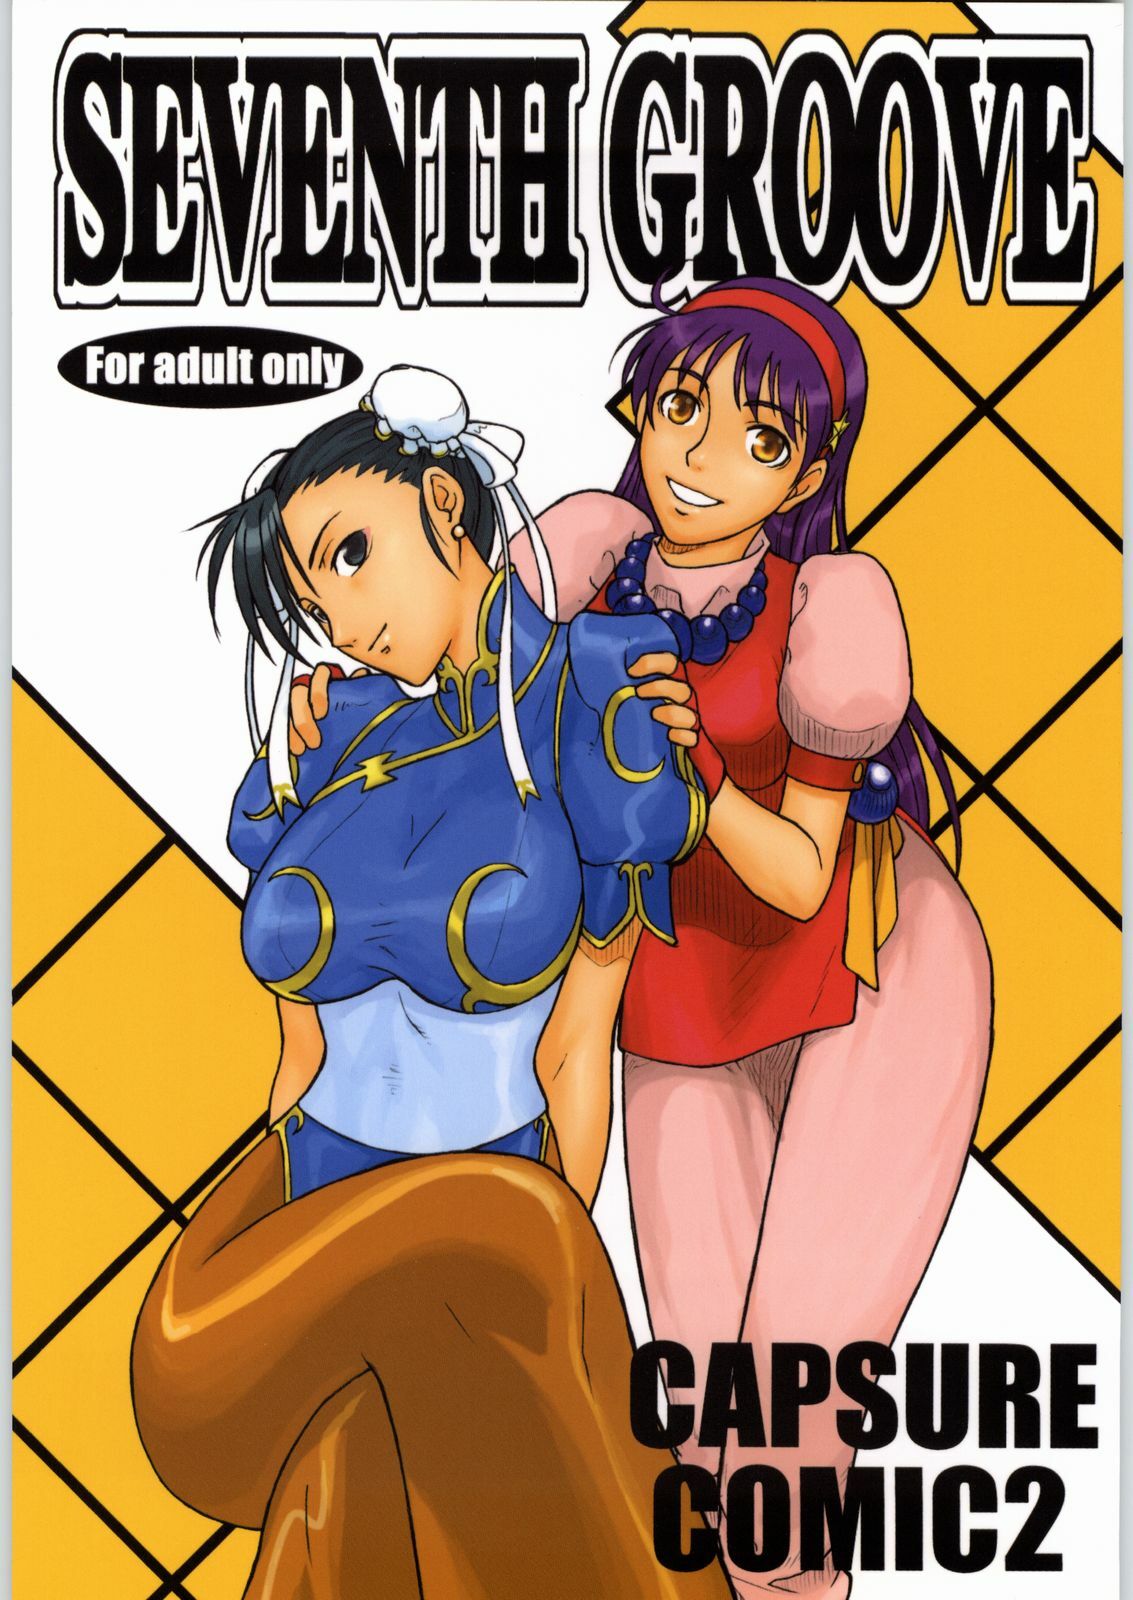 [OVER FLOWS] SEVENTH GROOVE (Capcom vs SNK) page 1 full